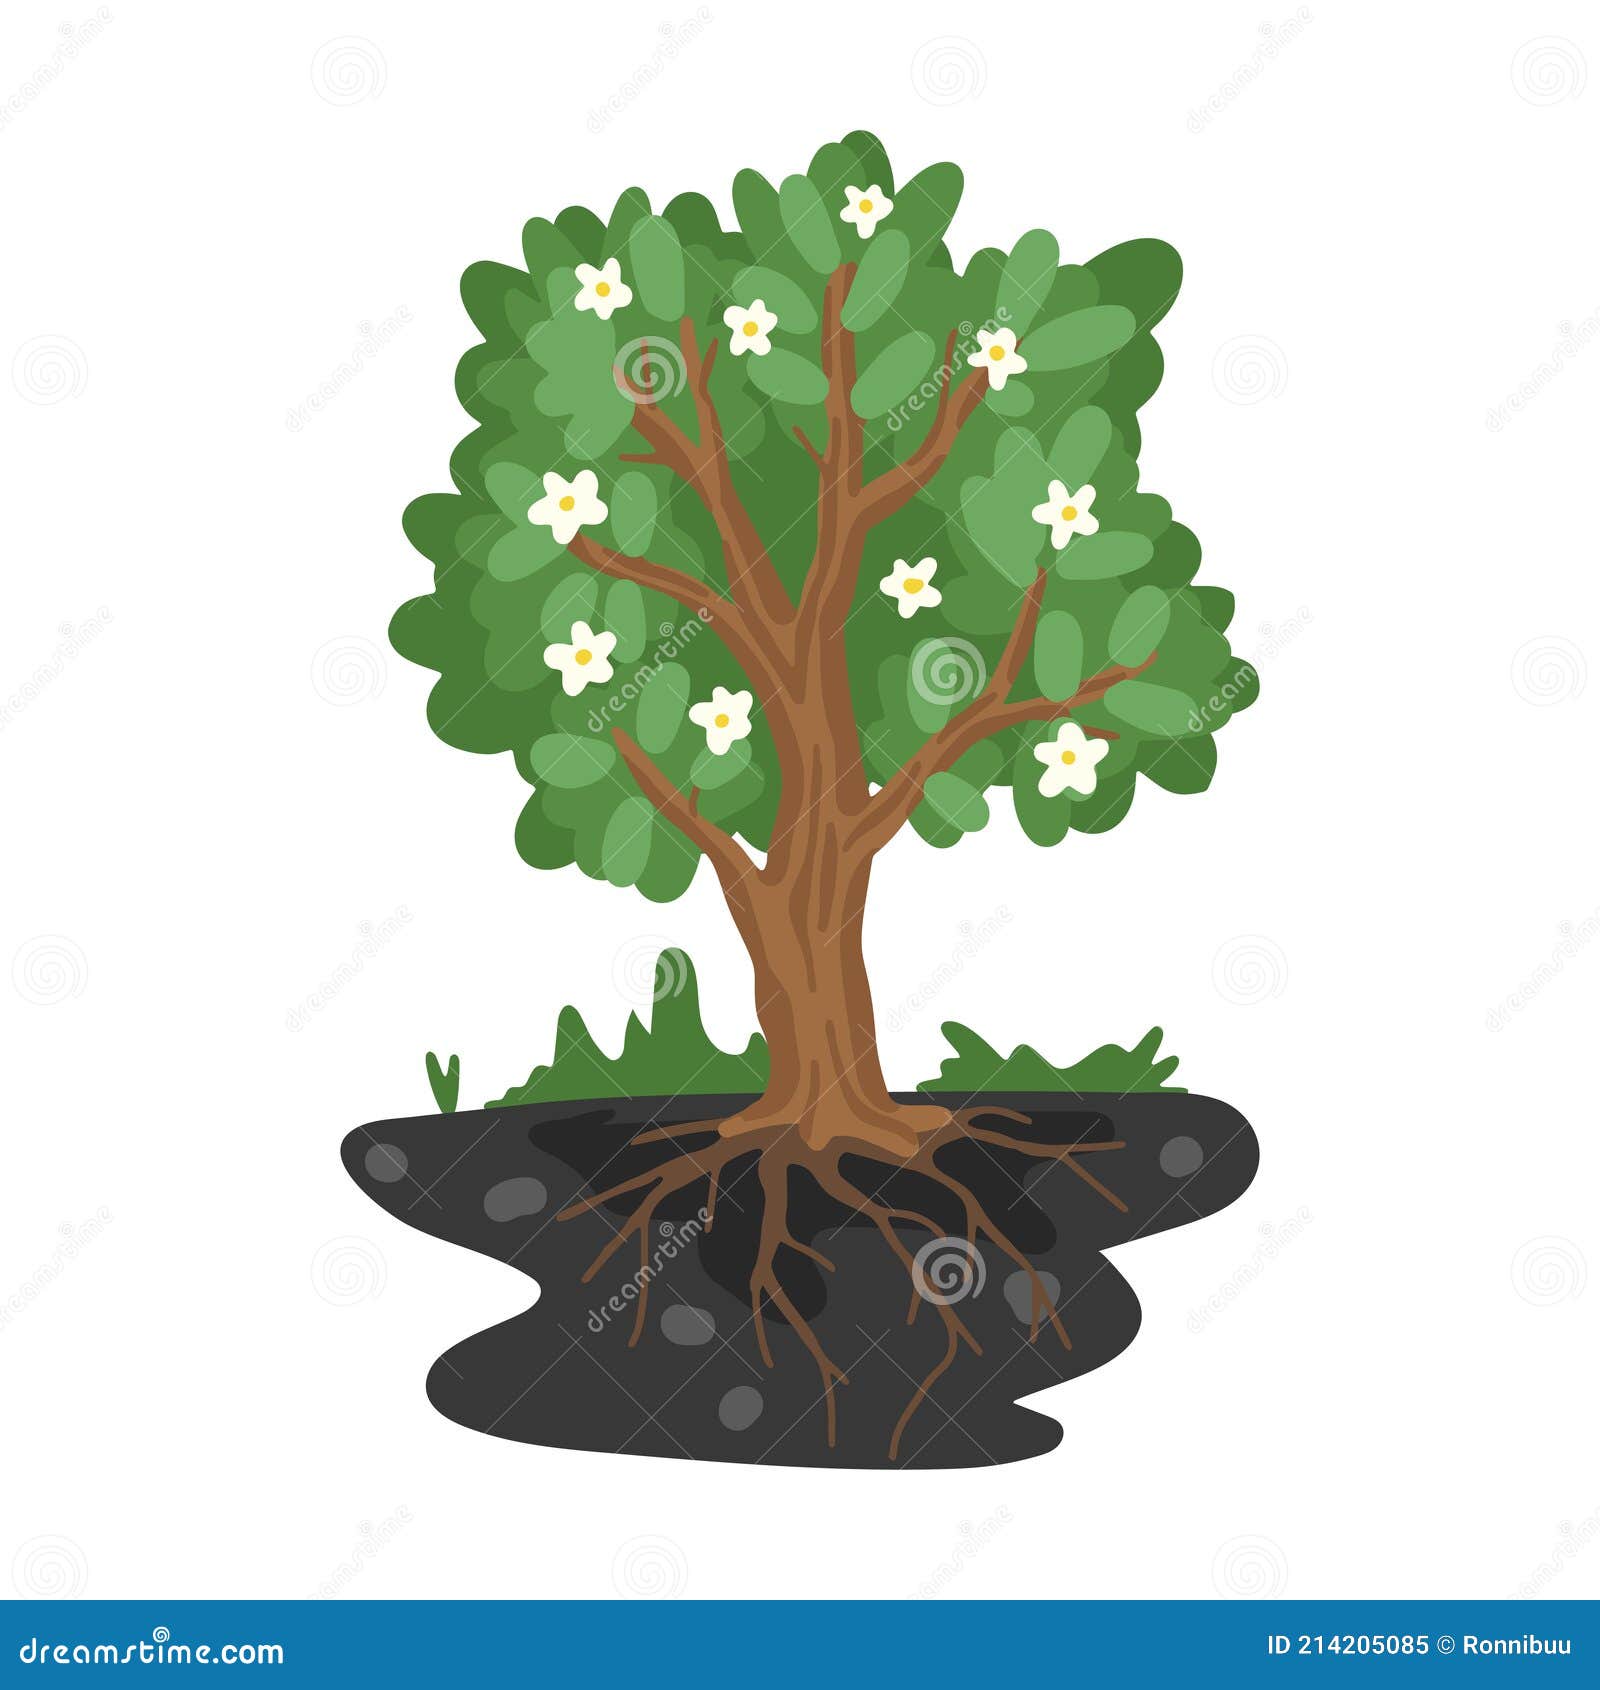 Blooming Tree with Roots in the Ground. Sectional Land. Tree Growth  Illustration. Vector Flat Cartoon Drawing Stock Vector - Illustration of  element, phases: 214205085